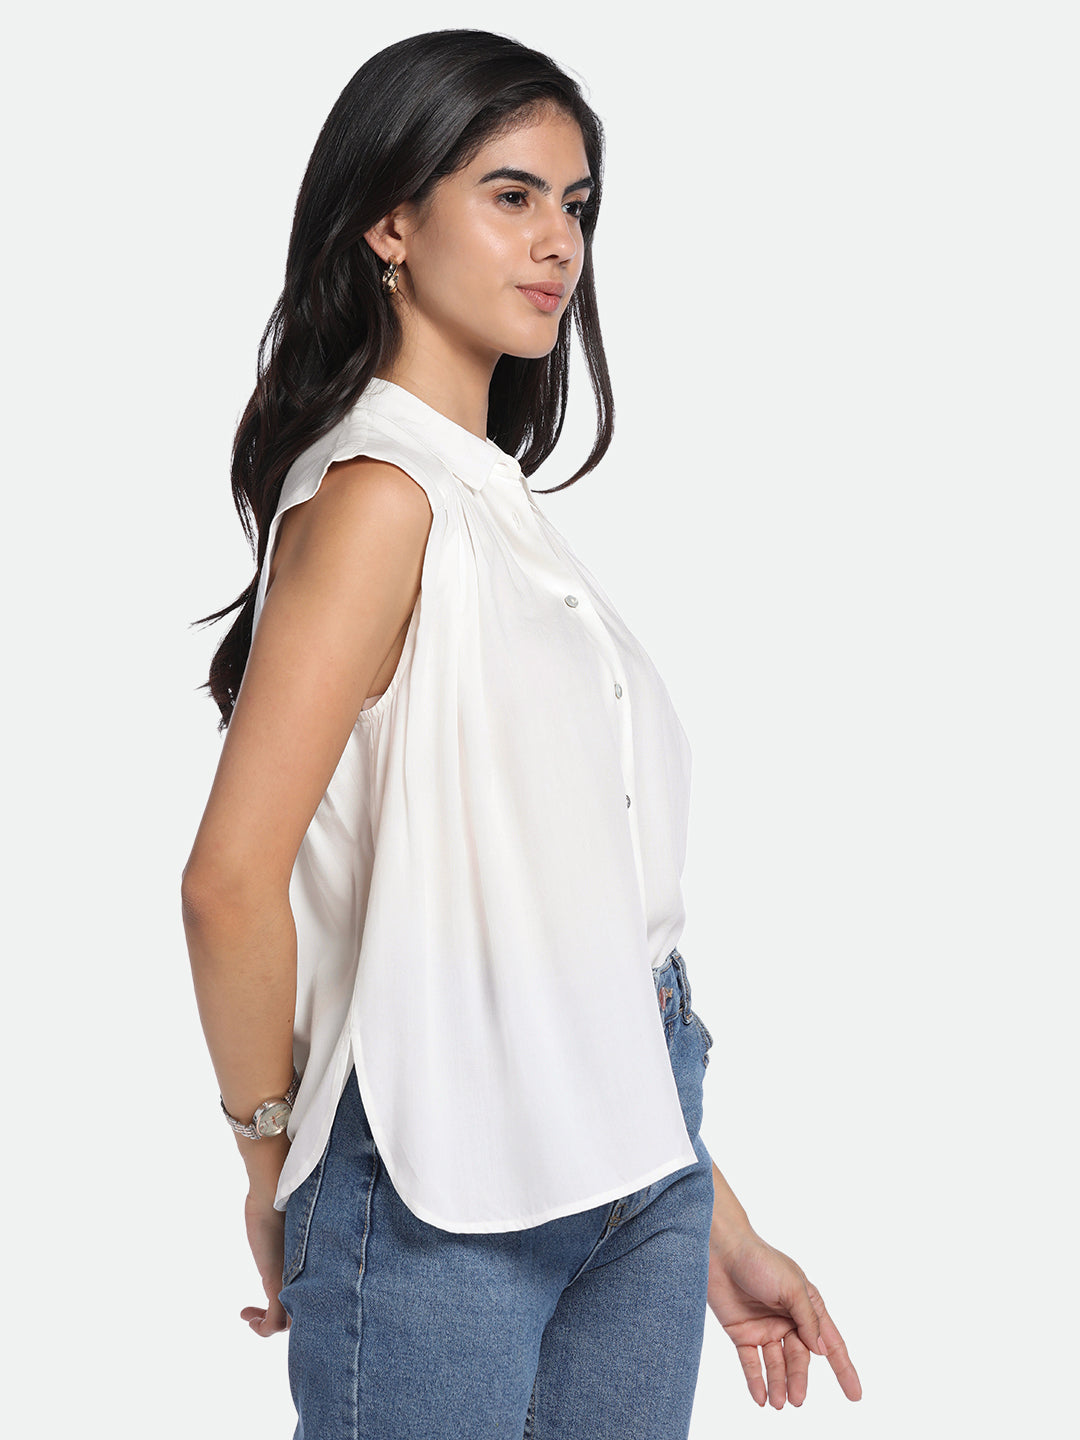 DL Woman OffWhite Sleeveless Gathered Casual Shirt